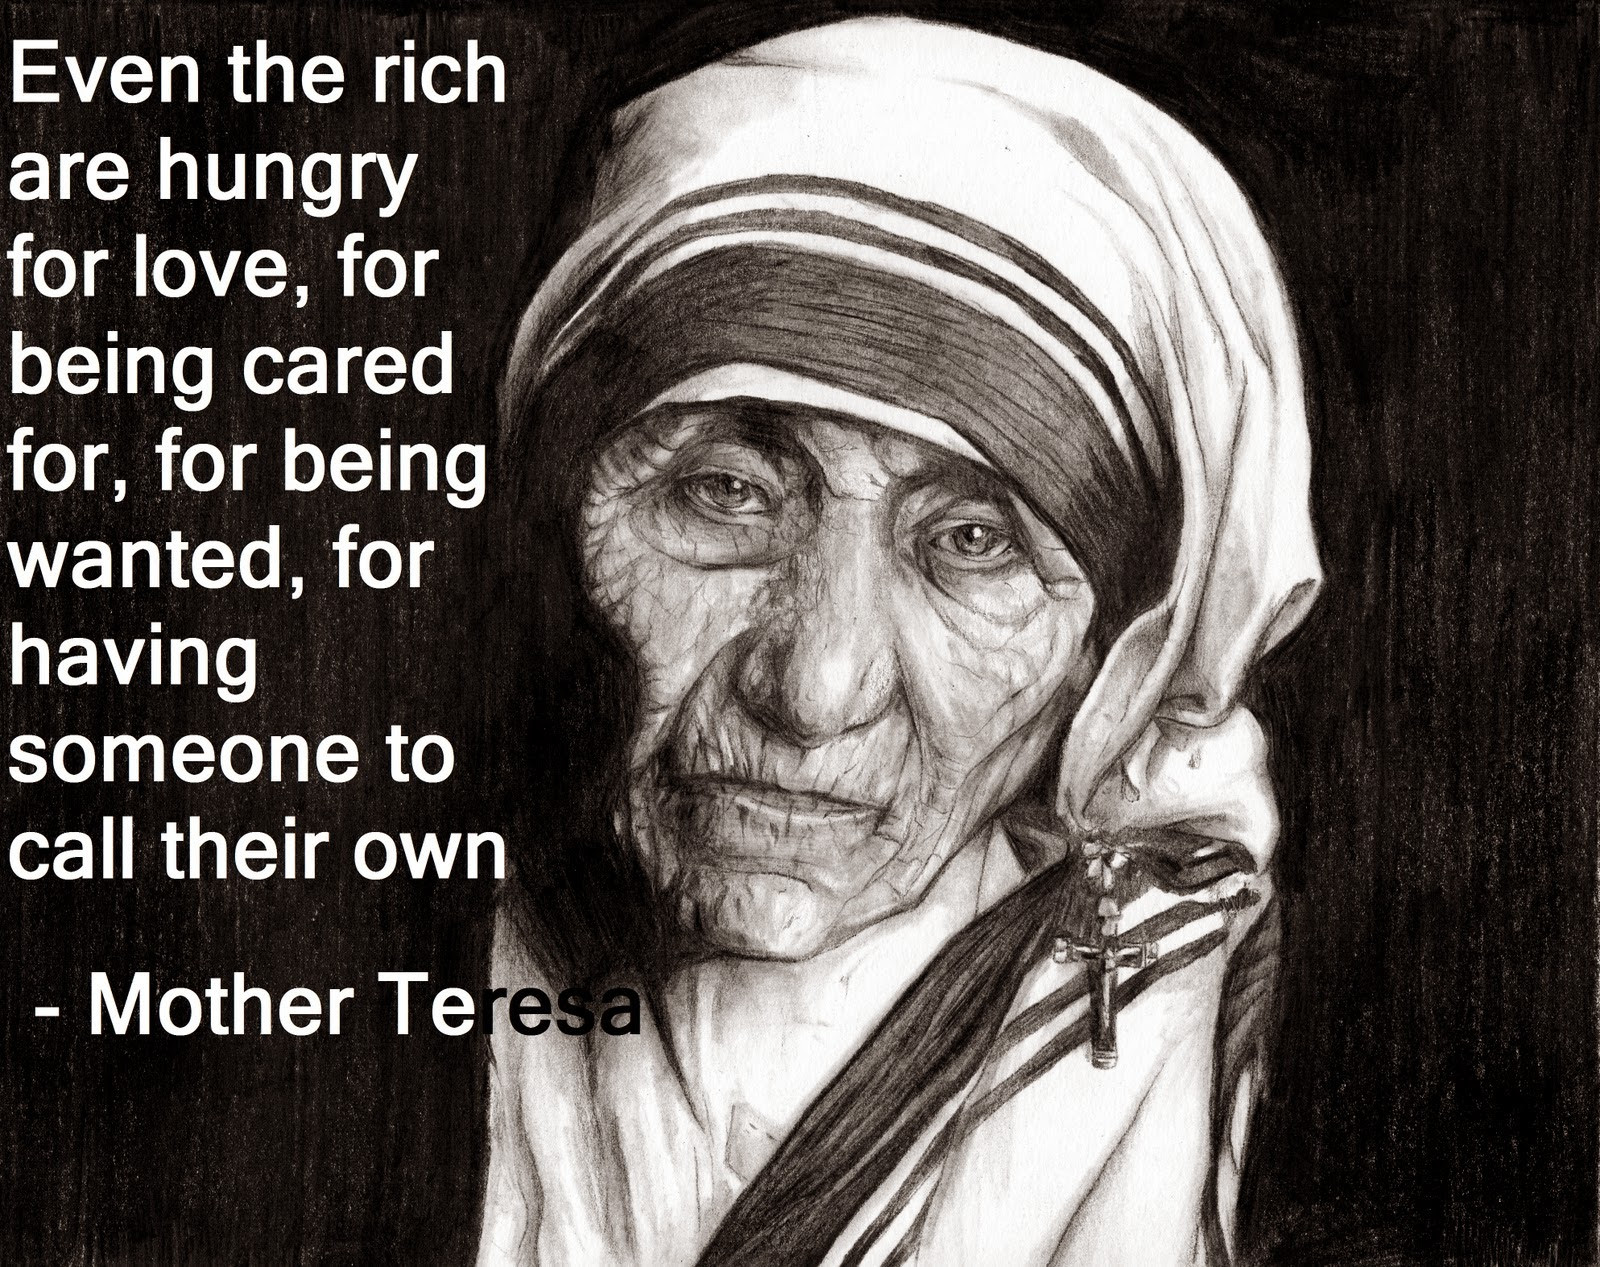 Mother Theresa Quote
 Teaching Quotes By Mother Teresa QuotesGram